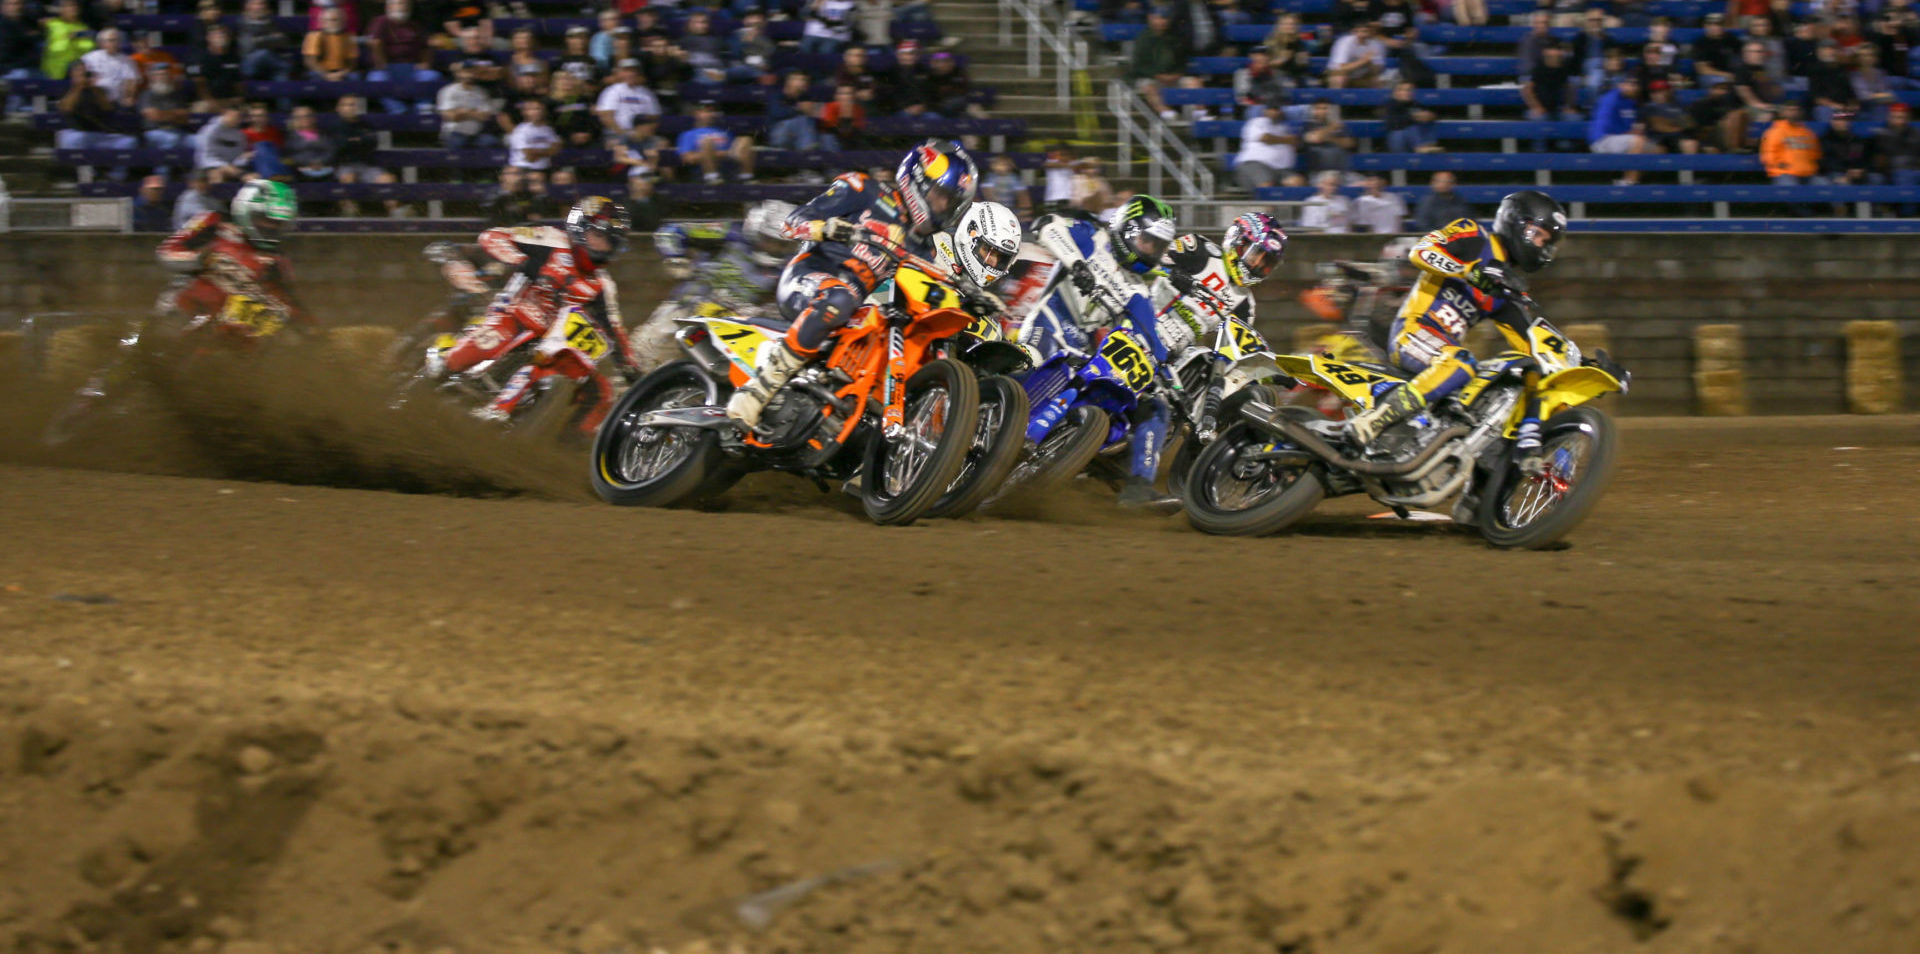 Action from the Springfield Short Track in 2019. Photo courtesy AFT.